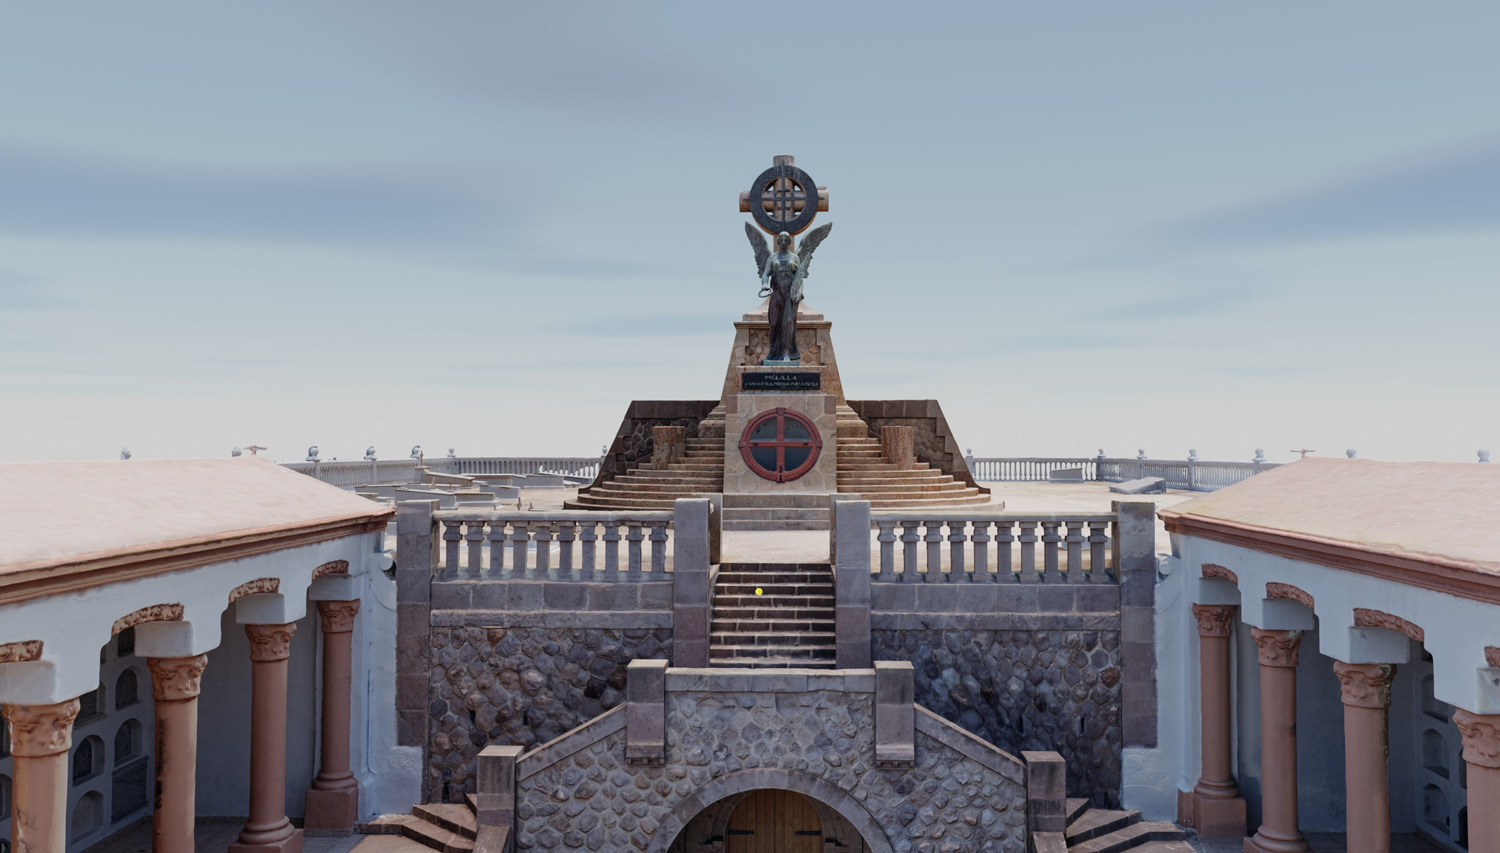 “The Pantheon of Heroes of Melilla”: A 3D Exploration with LIDAR, Photogrammetry